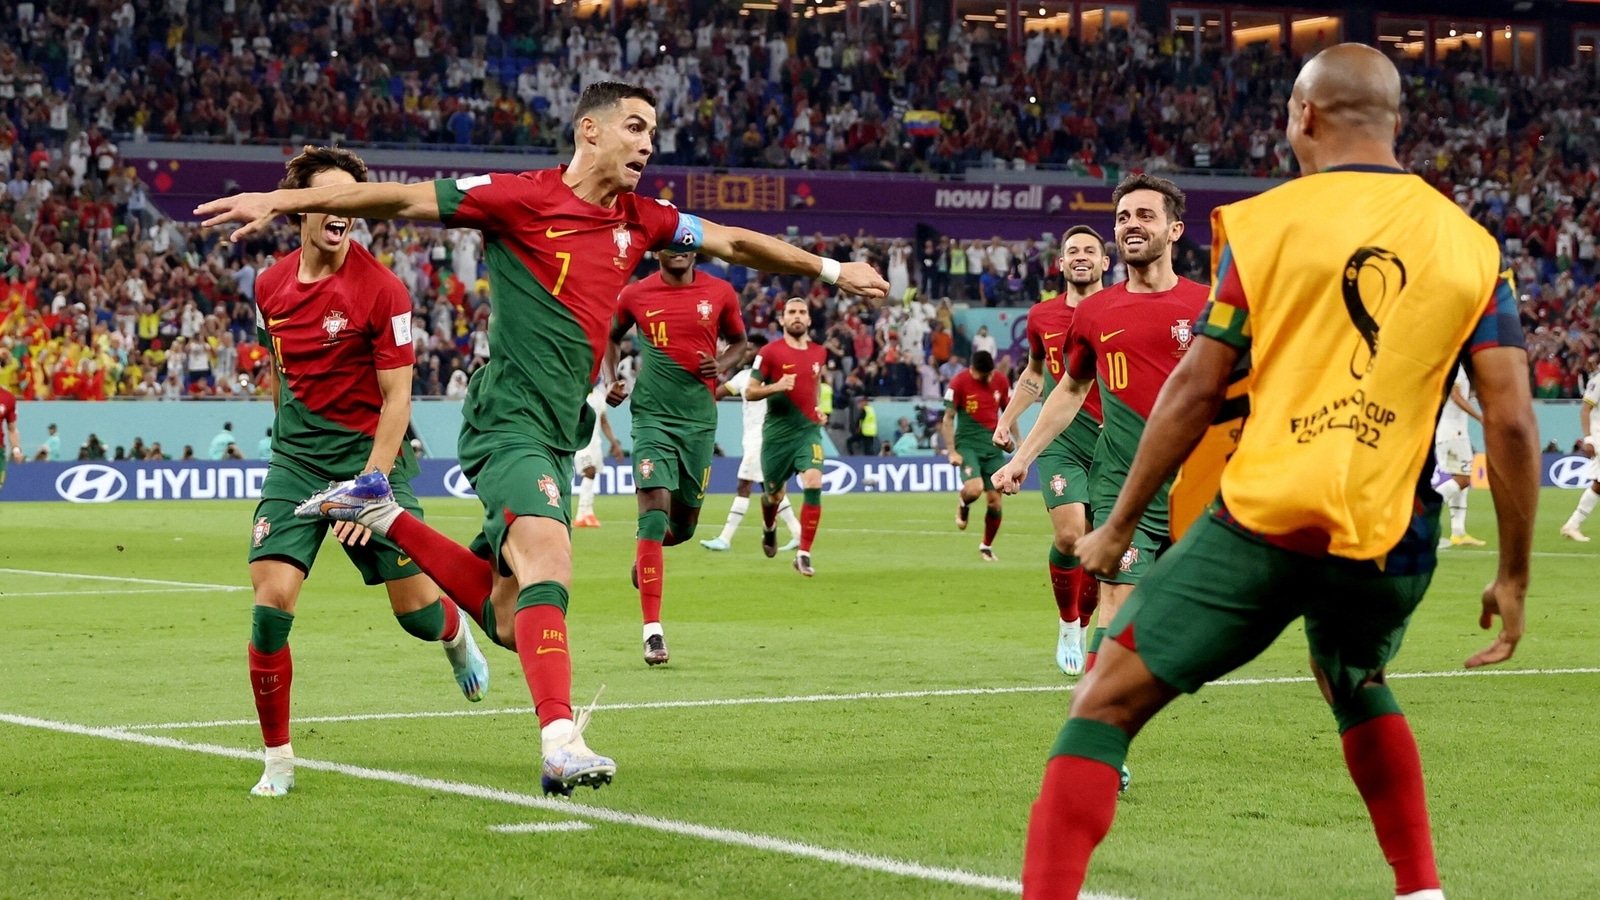 FIFA World Cup 2022: Cristiano Ronaldo hails Portugal’s group stage performance, backs teammates for Round of 16